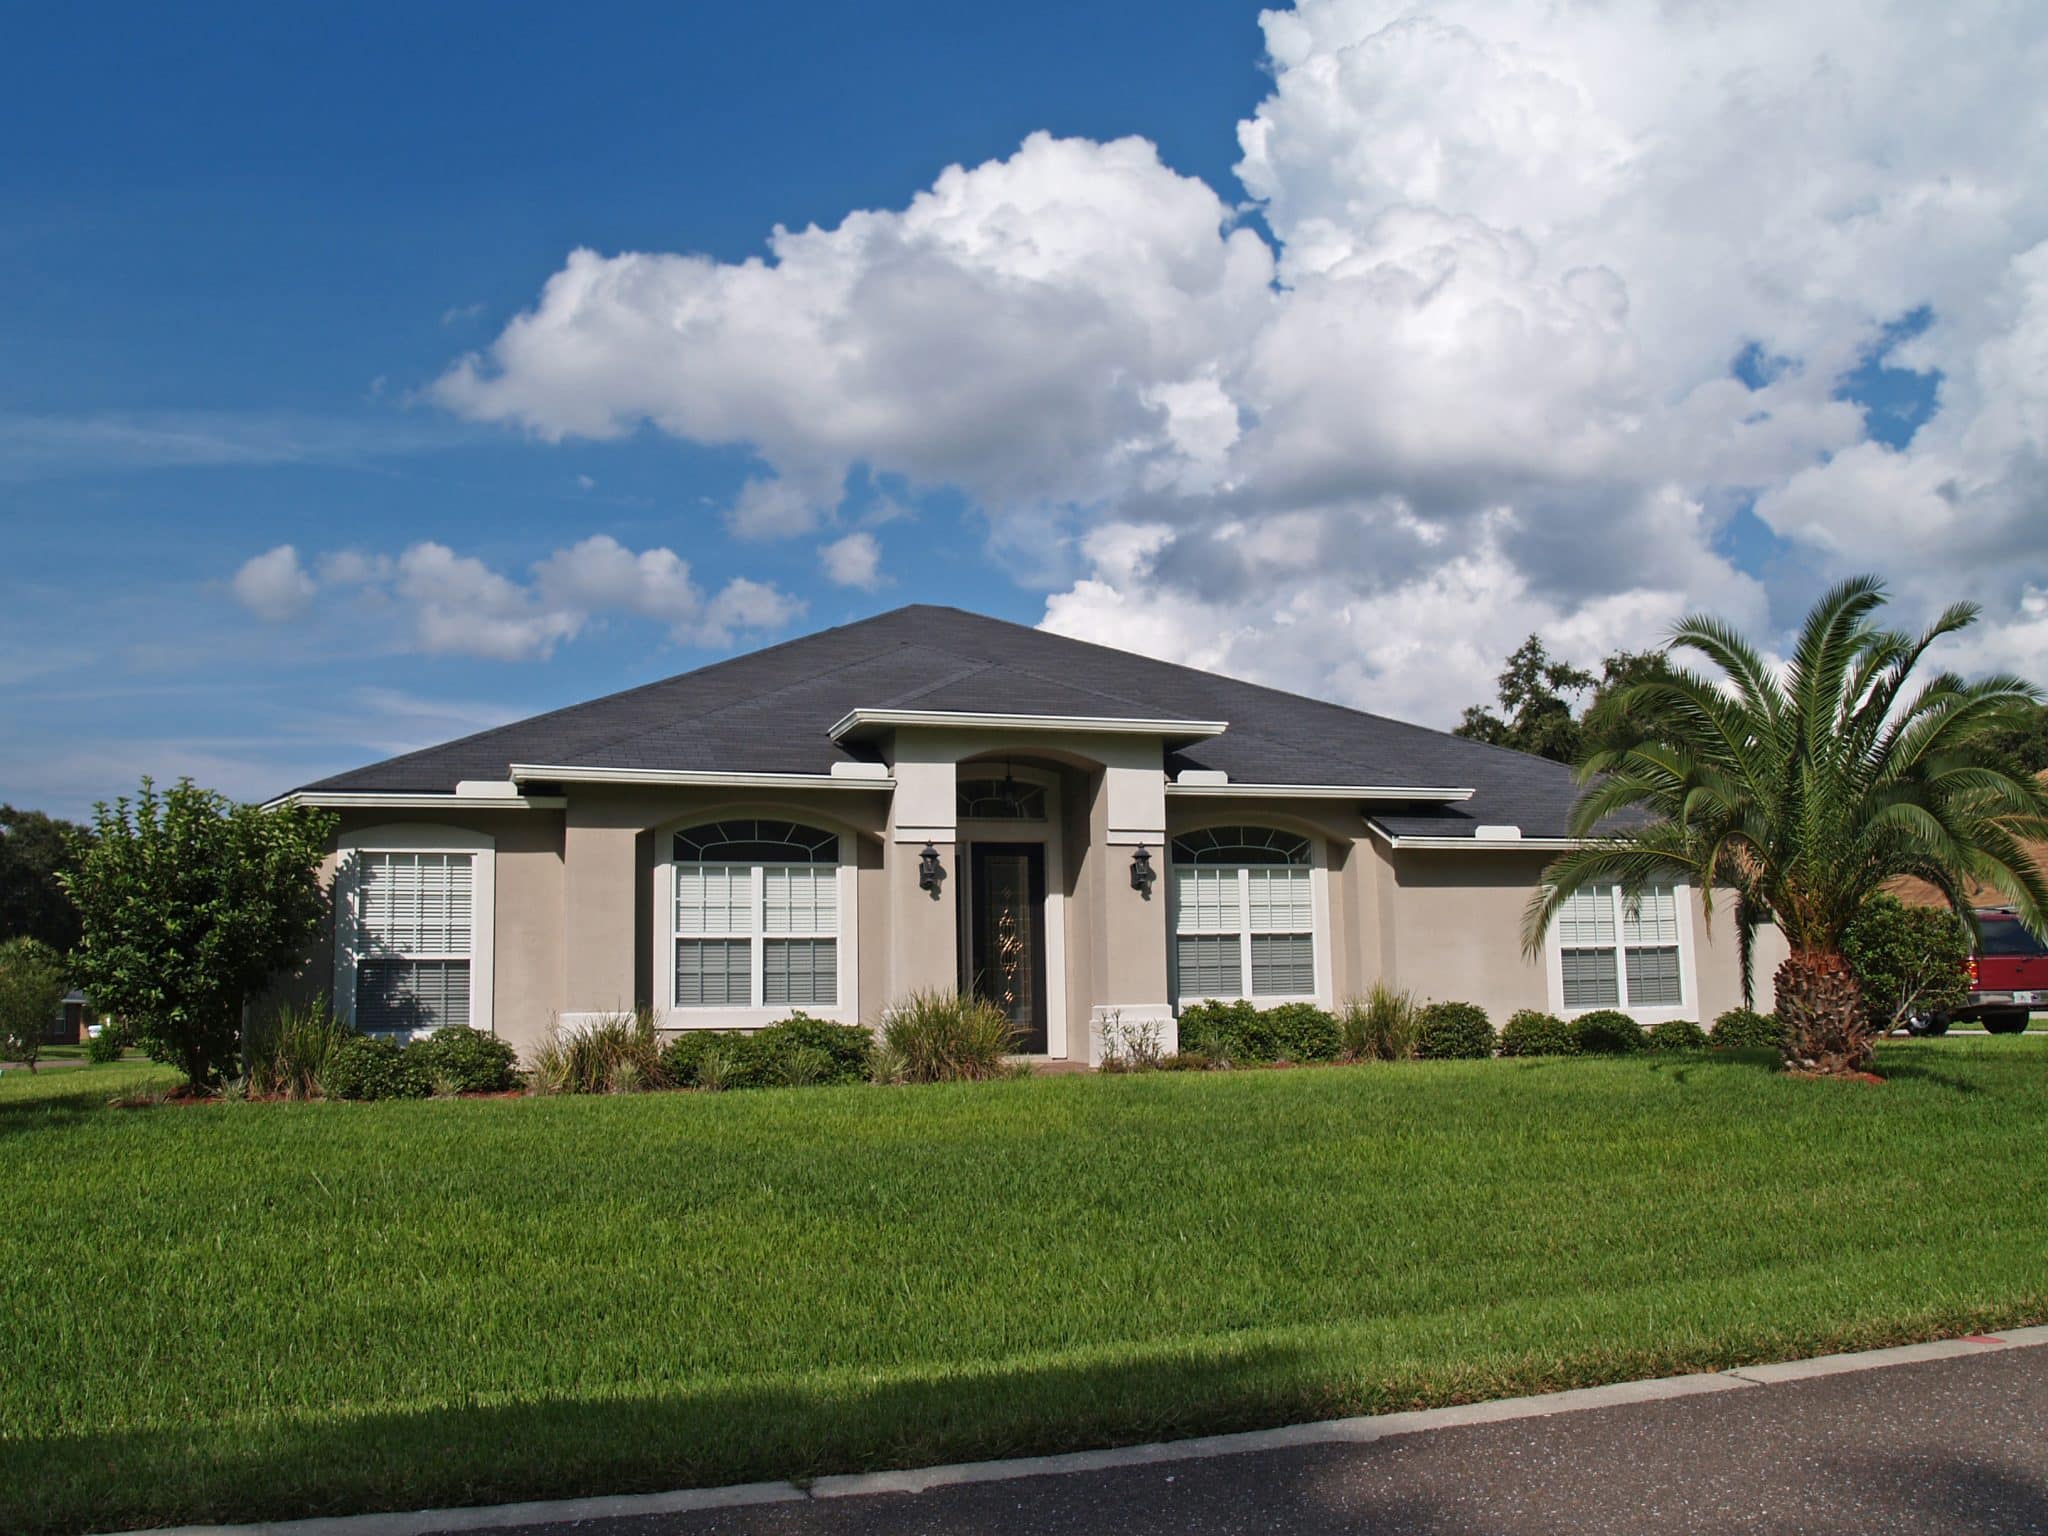 A beautiful home with a new roof in Central Florida